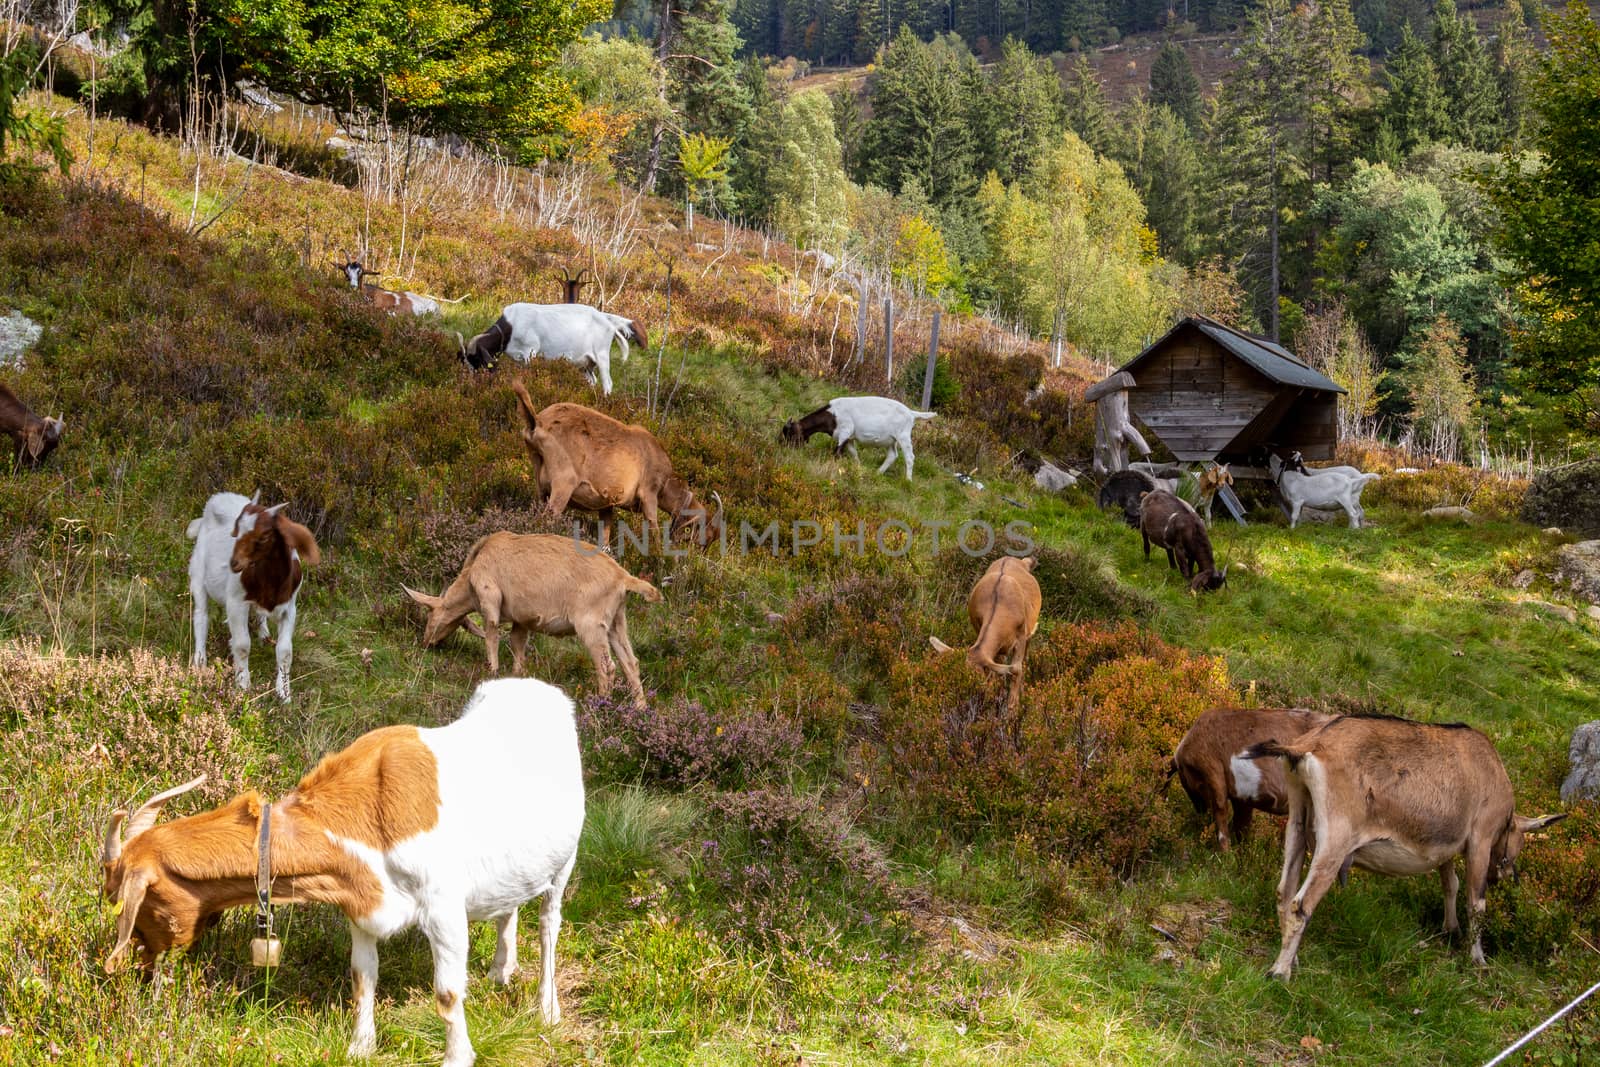 Grazing herd of goats  on a multi colored hill nearby Menzenschwand, Germany by reinerc